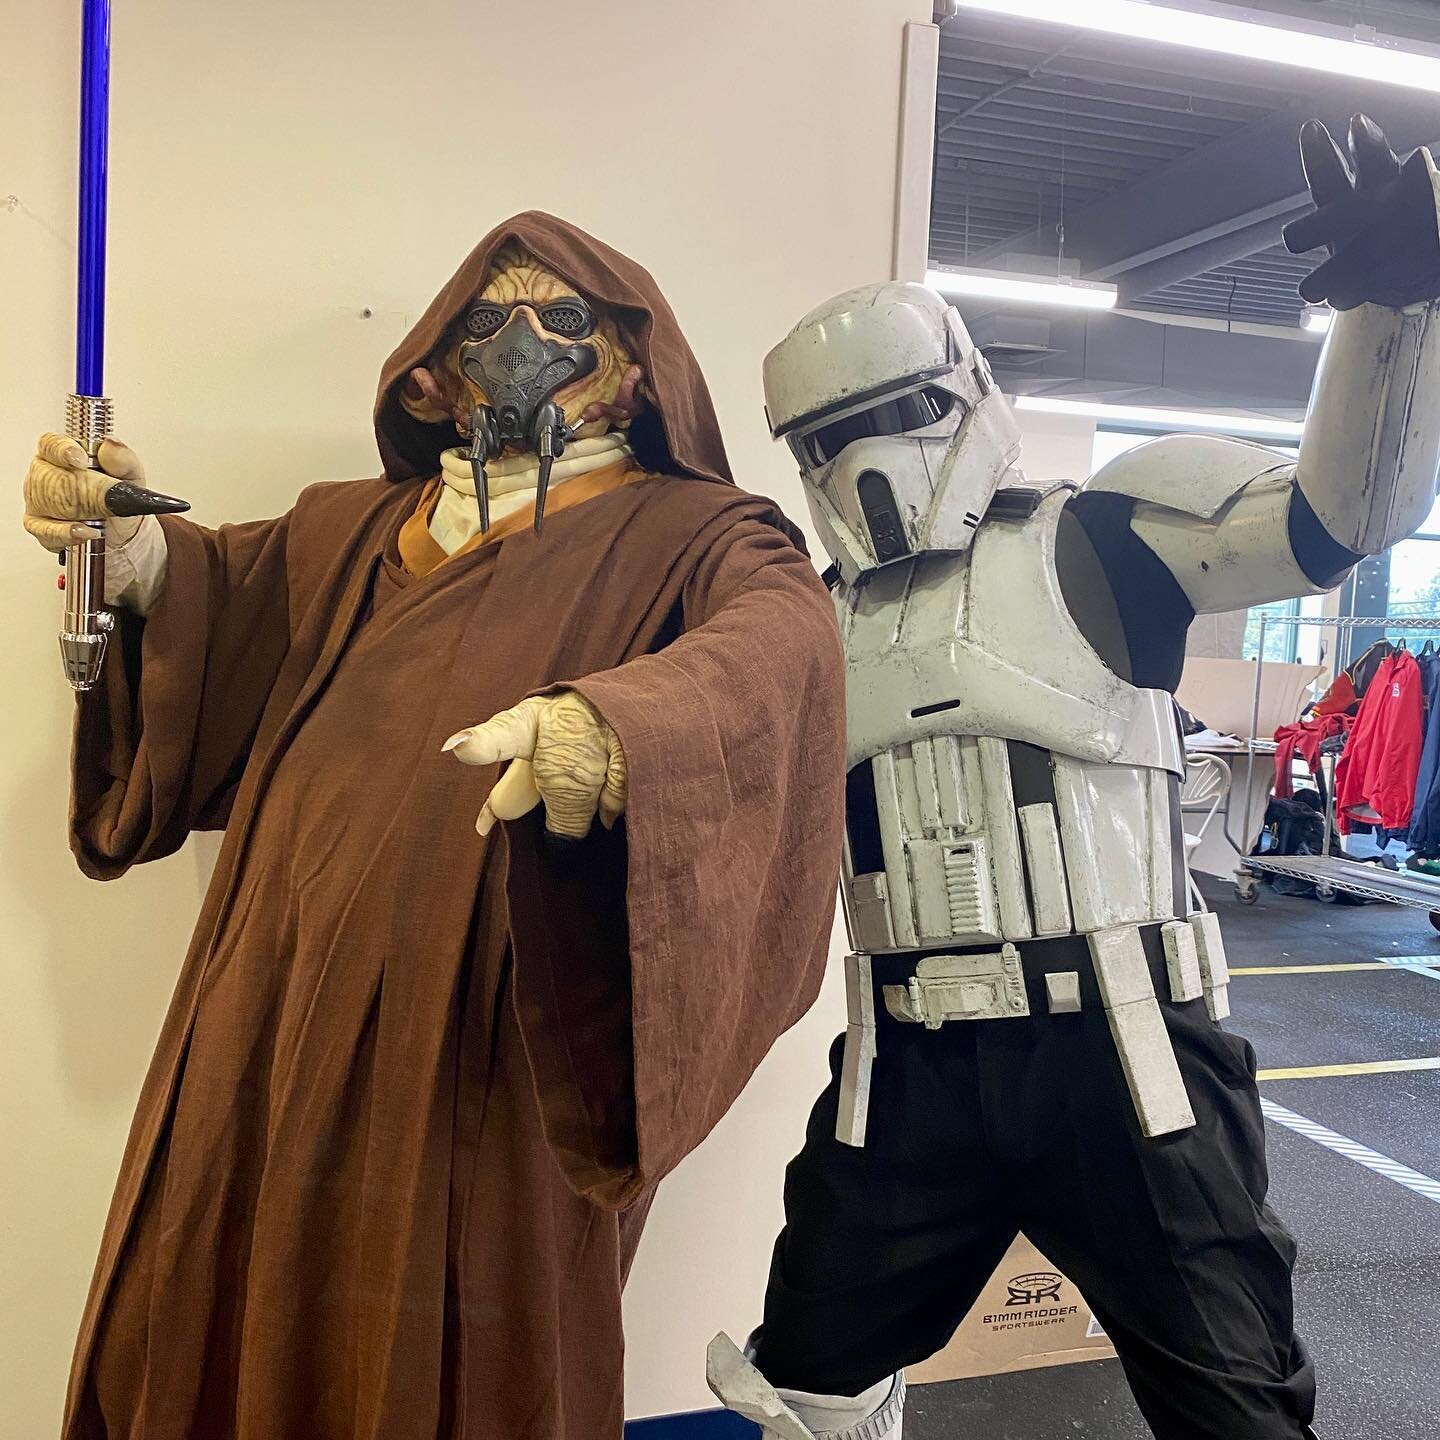 Master Plo and TA-22795 are keeping the good vibes going this week. Happy Wednesday! 😎

@officialrebellegion @rebellegion_kjo 
@official501st @501stacd @501st_ner 

#rebellegion #devaronbaserl #knightsofthejediorder #plokoon #501stlegion #501stNER #